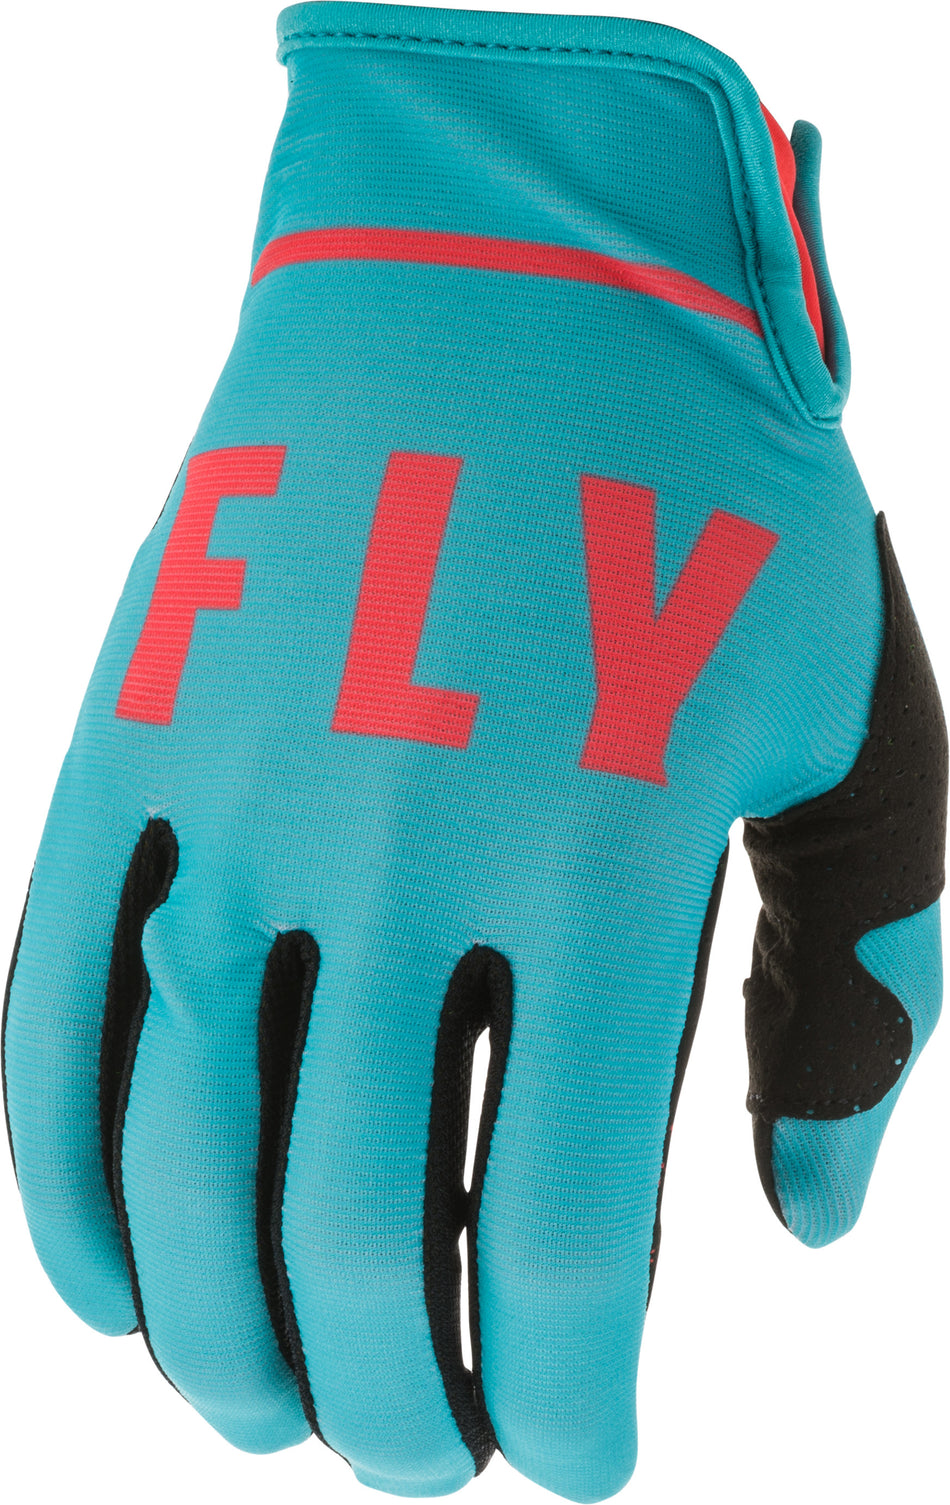 FLY RACING Lite Gloves Blue/Coral Sz 06 373-71906